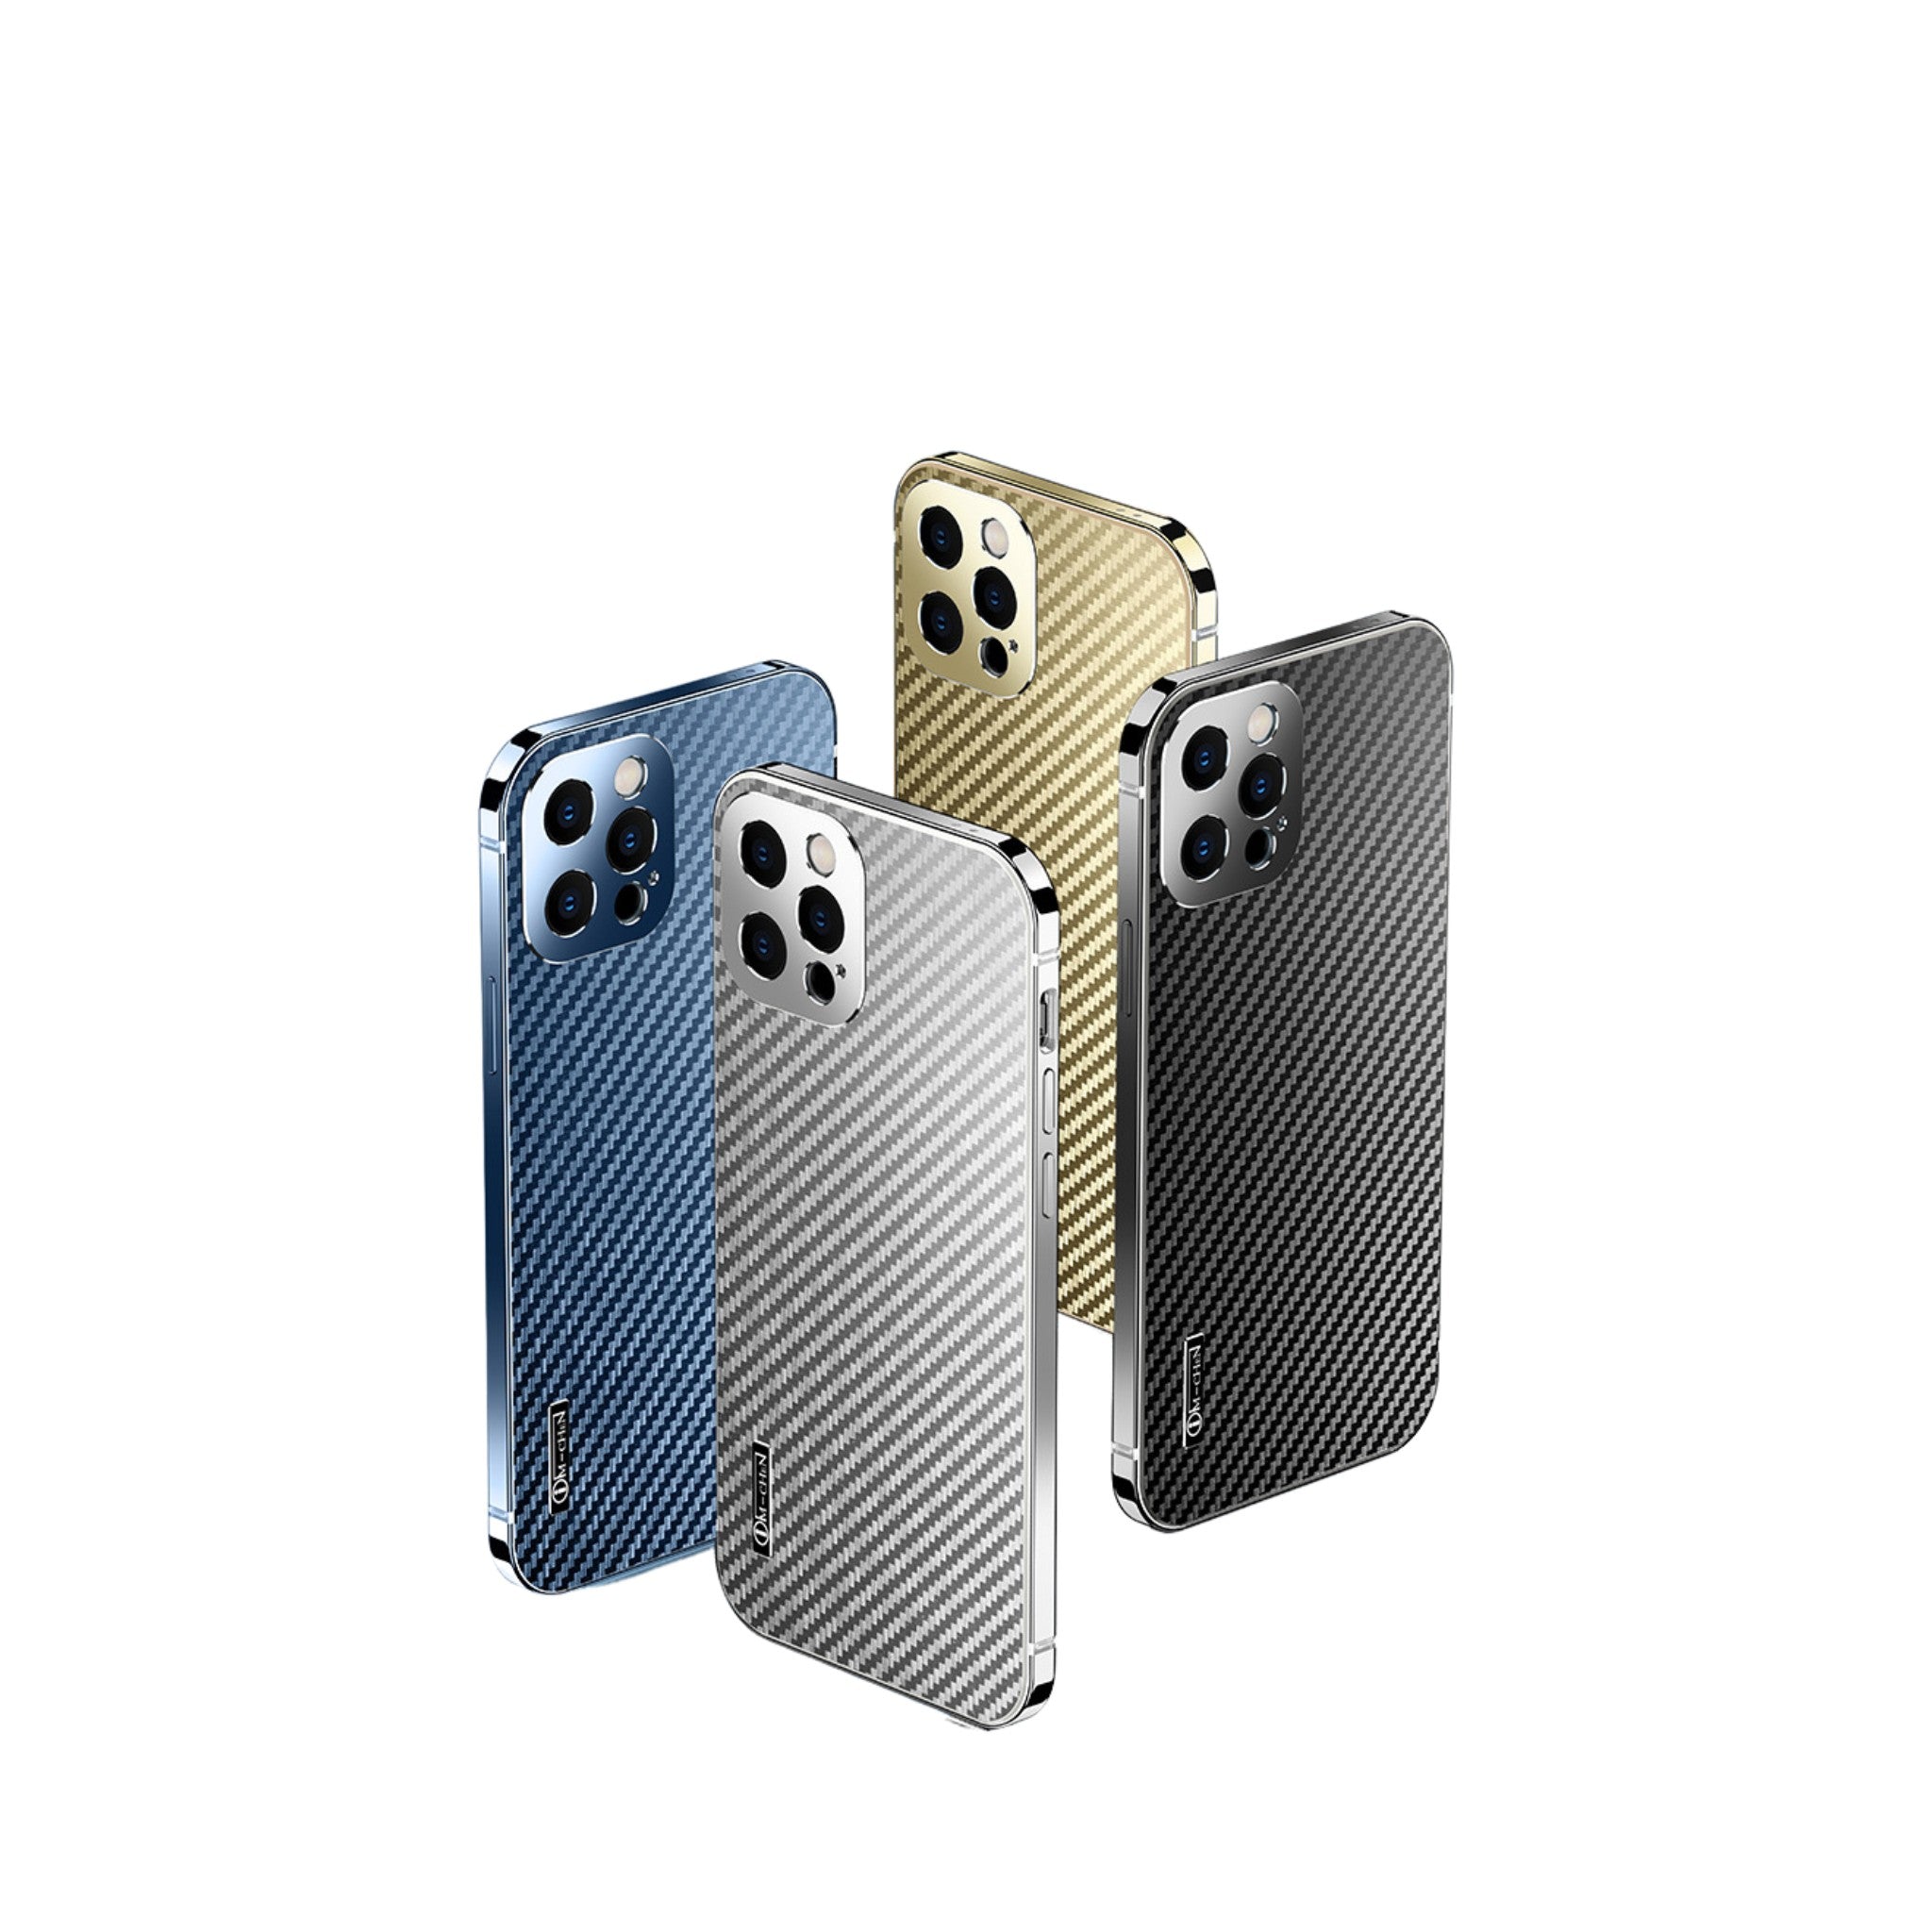 Carbon Fiber Stainless Steel Metal Coated Bumper Cases Anacotte